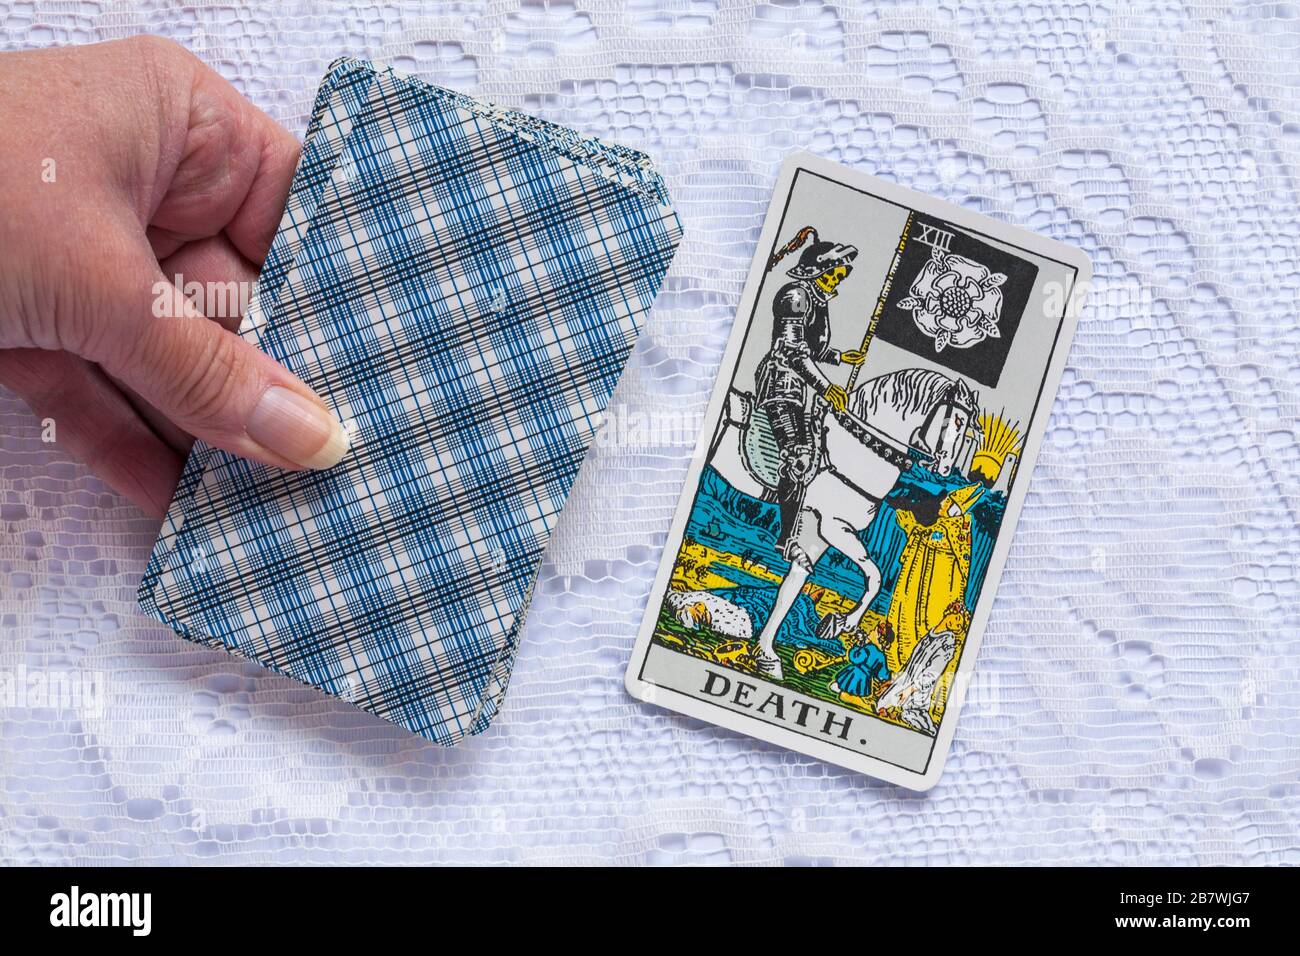 hand holding Rider Tarot Cards designed by Pamela Colman Smith under supervision of Arthur Edward Waite with Death tarot card upturned Stock Photo